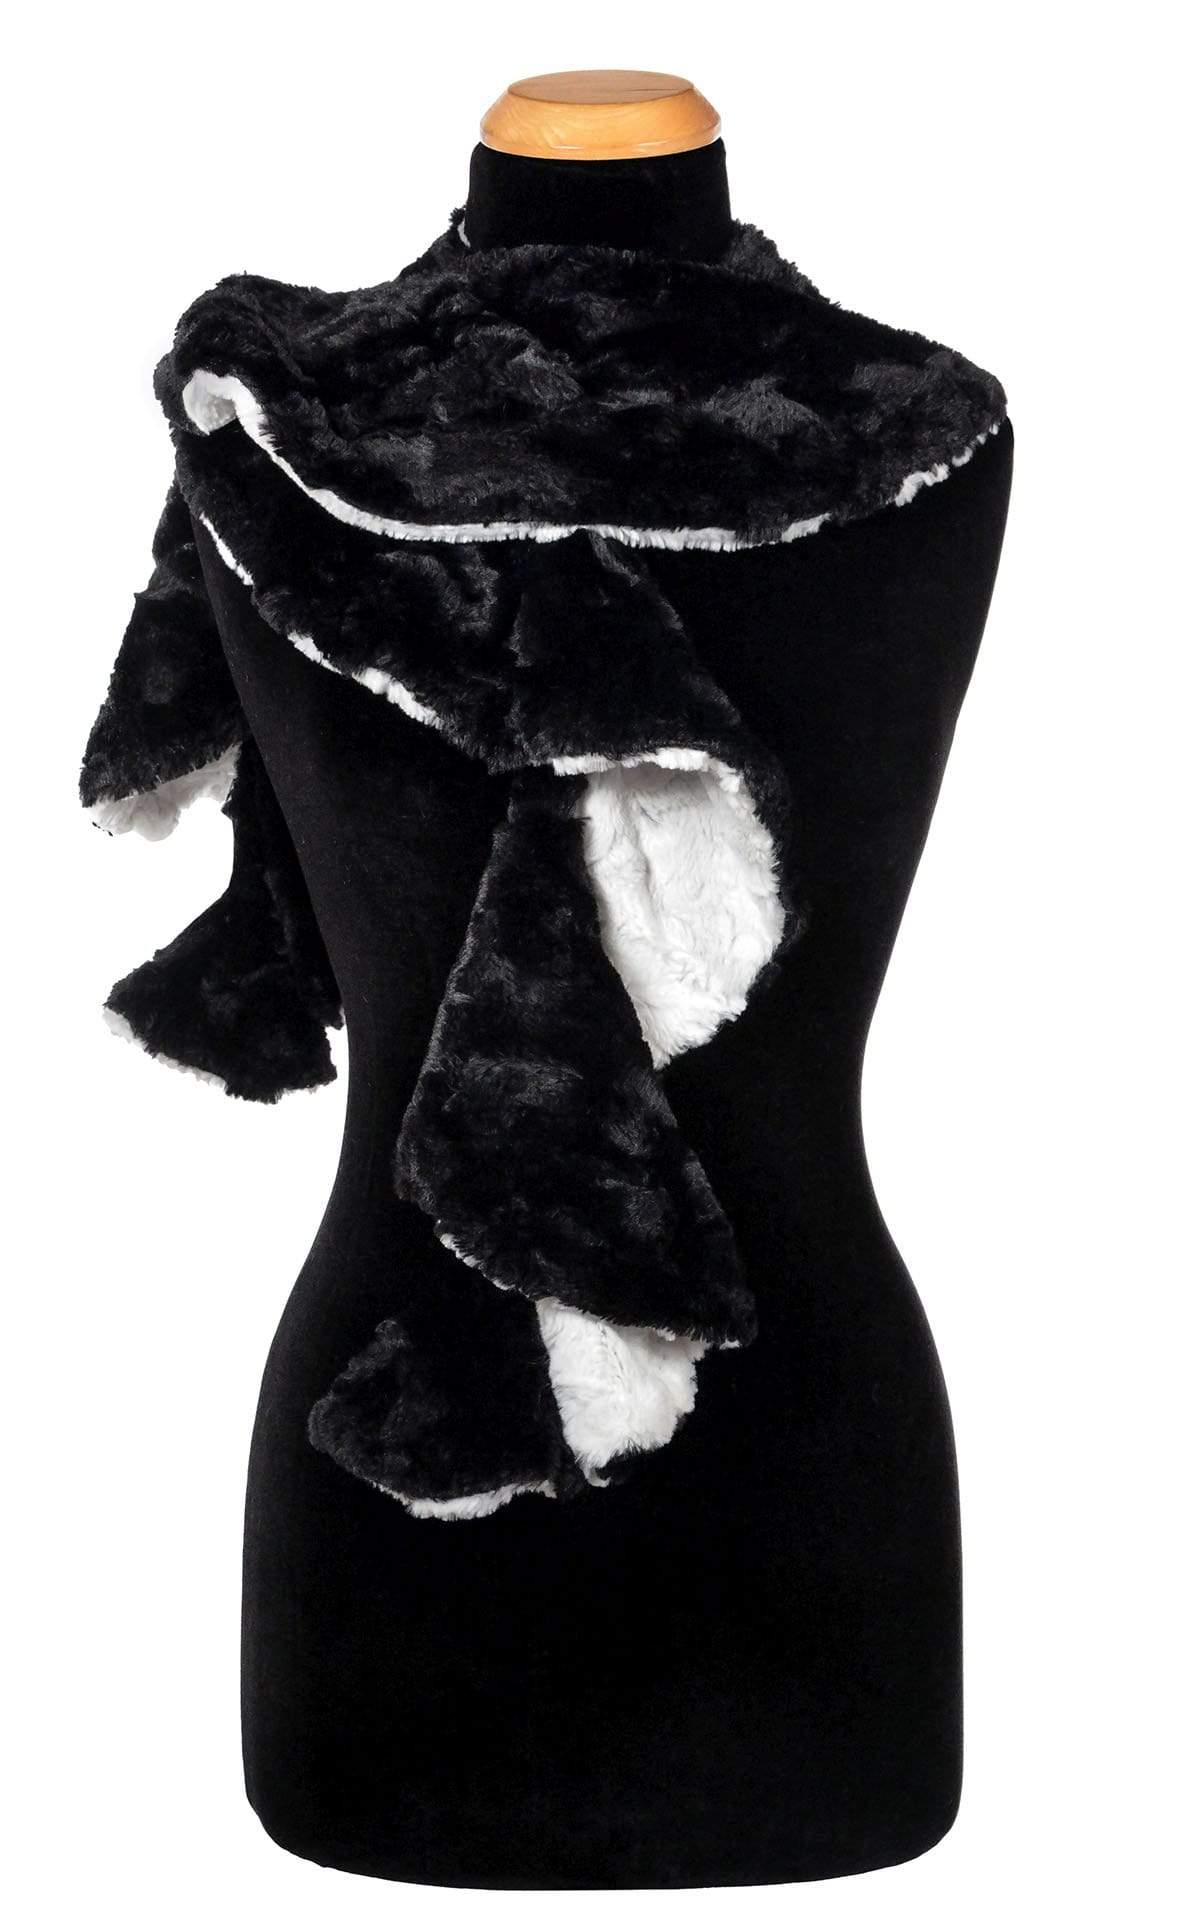 Cascade Scarf | Ivory and Black Cuddly Faux Fur | Handmade Seattle WA USA by Pandemonium Millinery